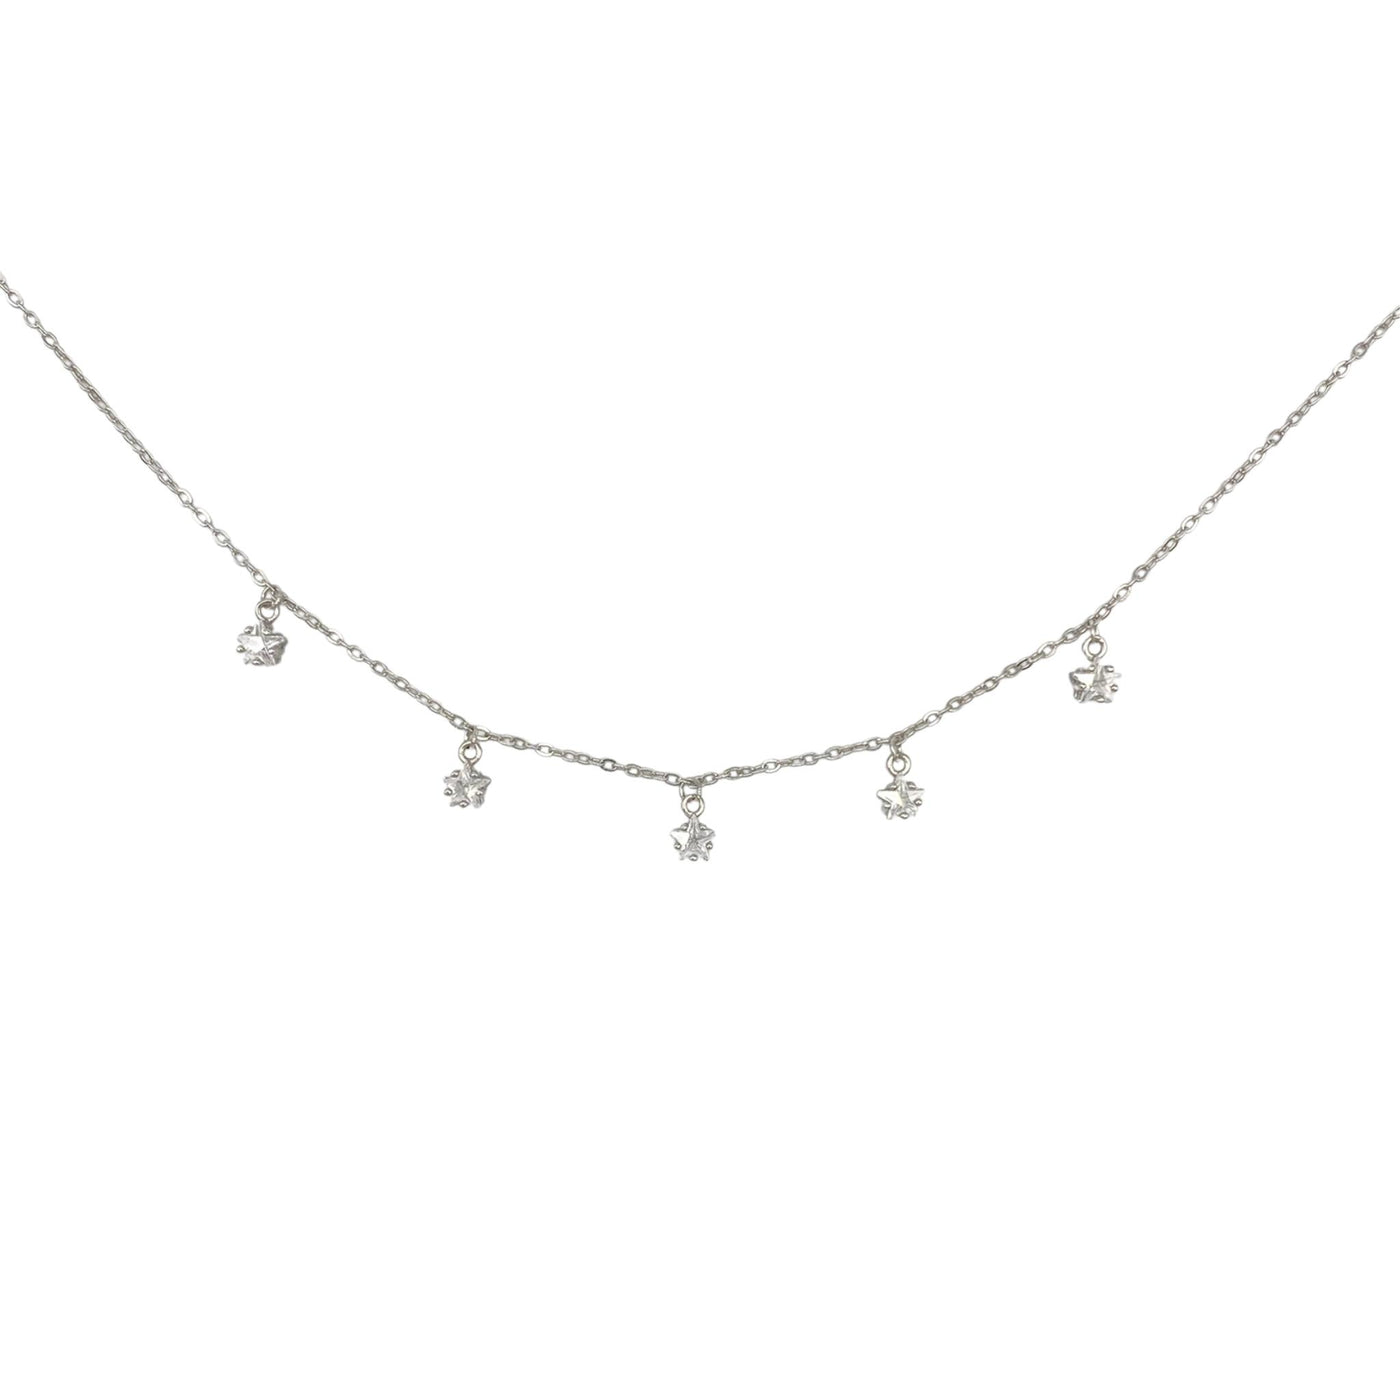 Silver necklace with white stars charms